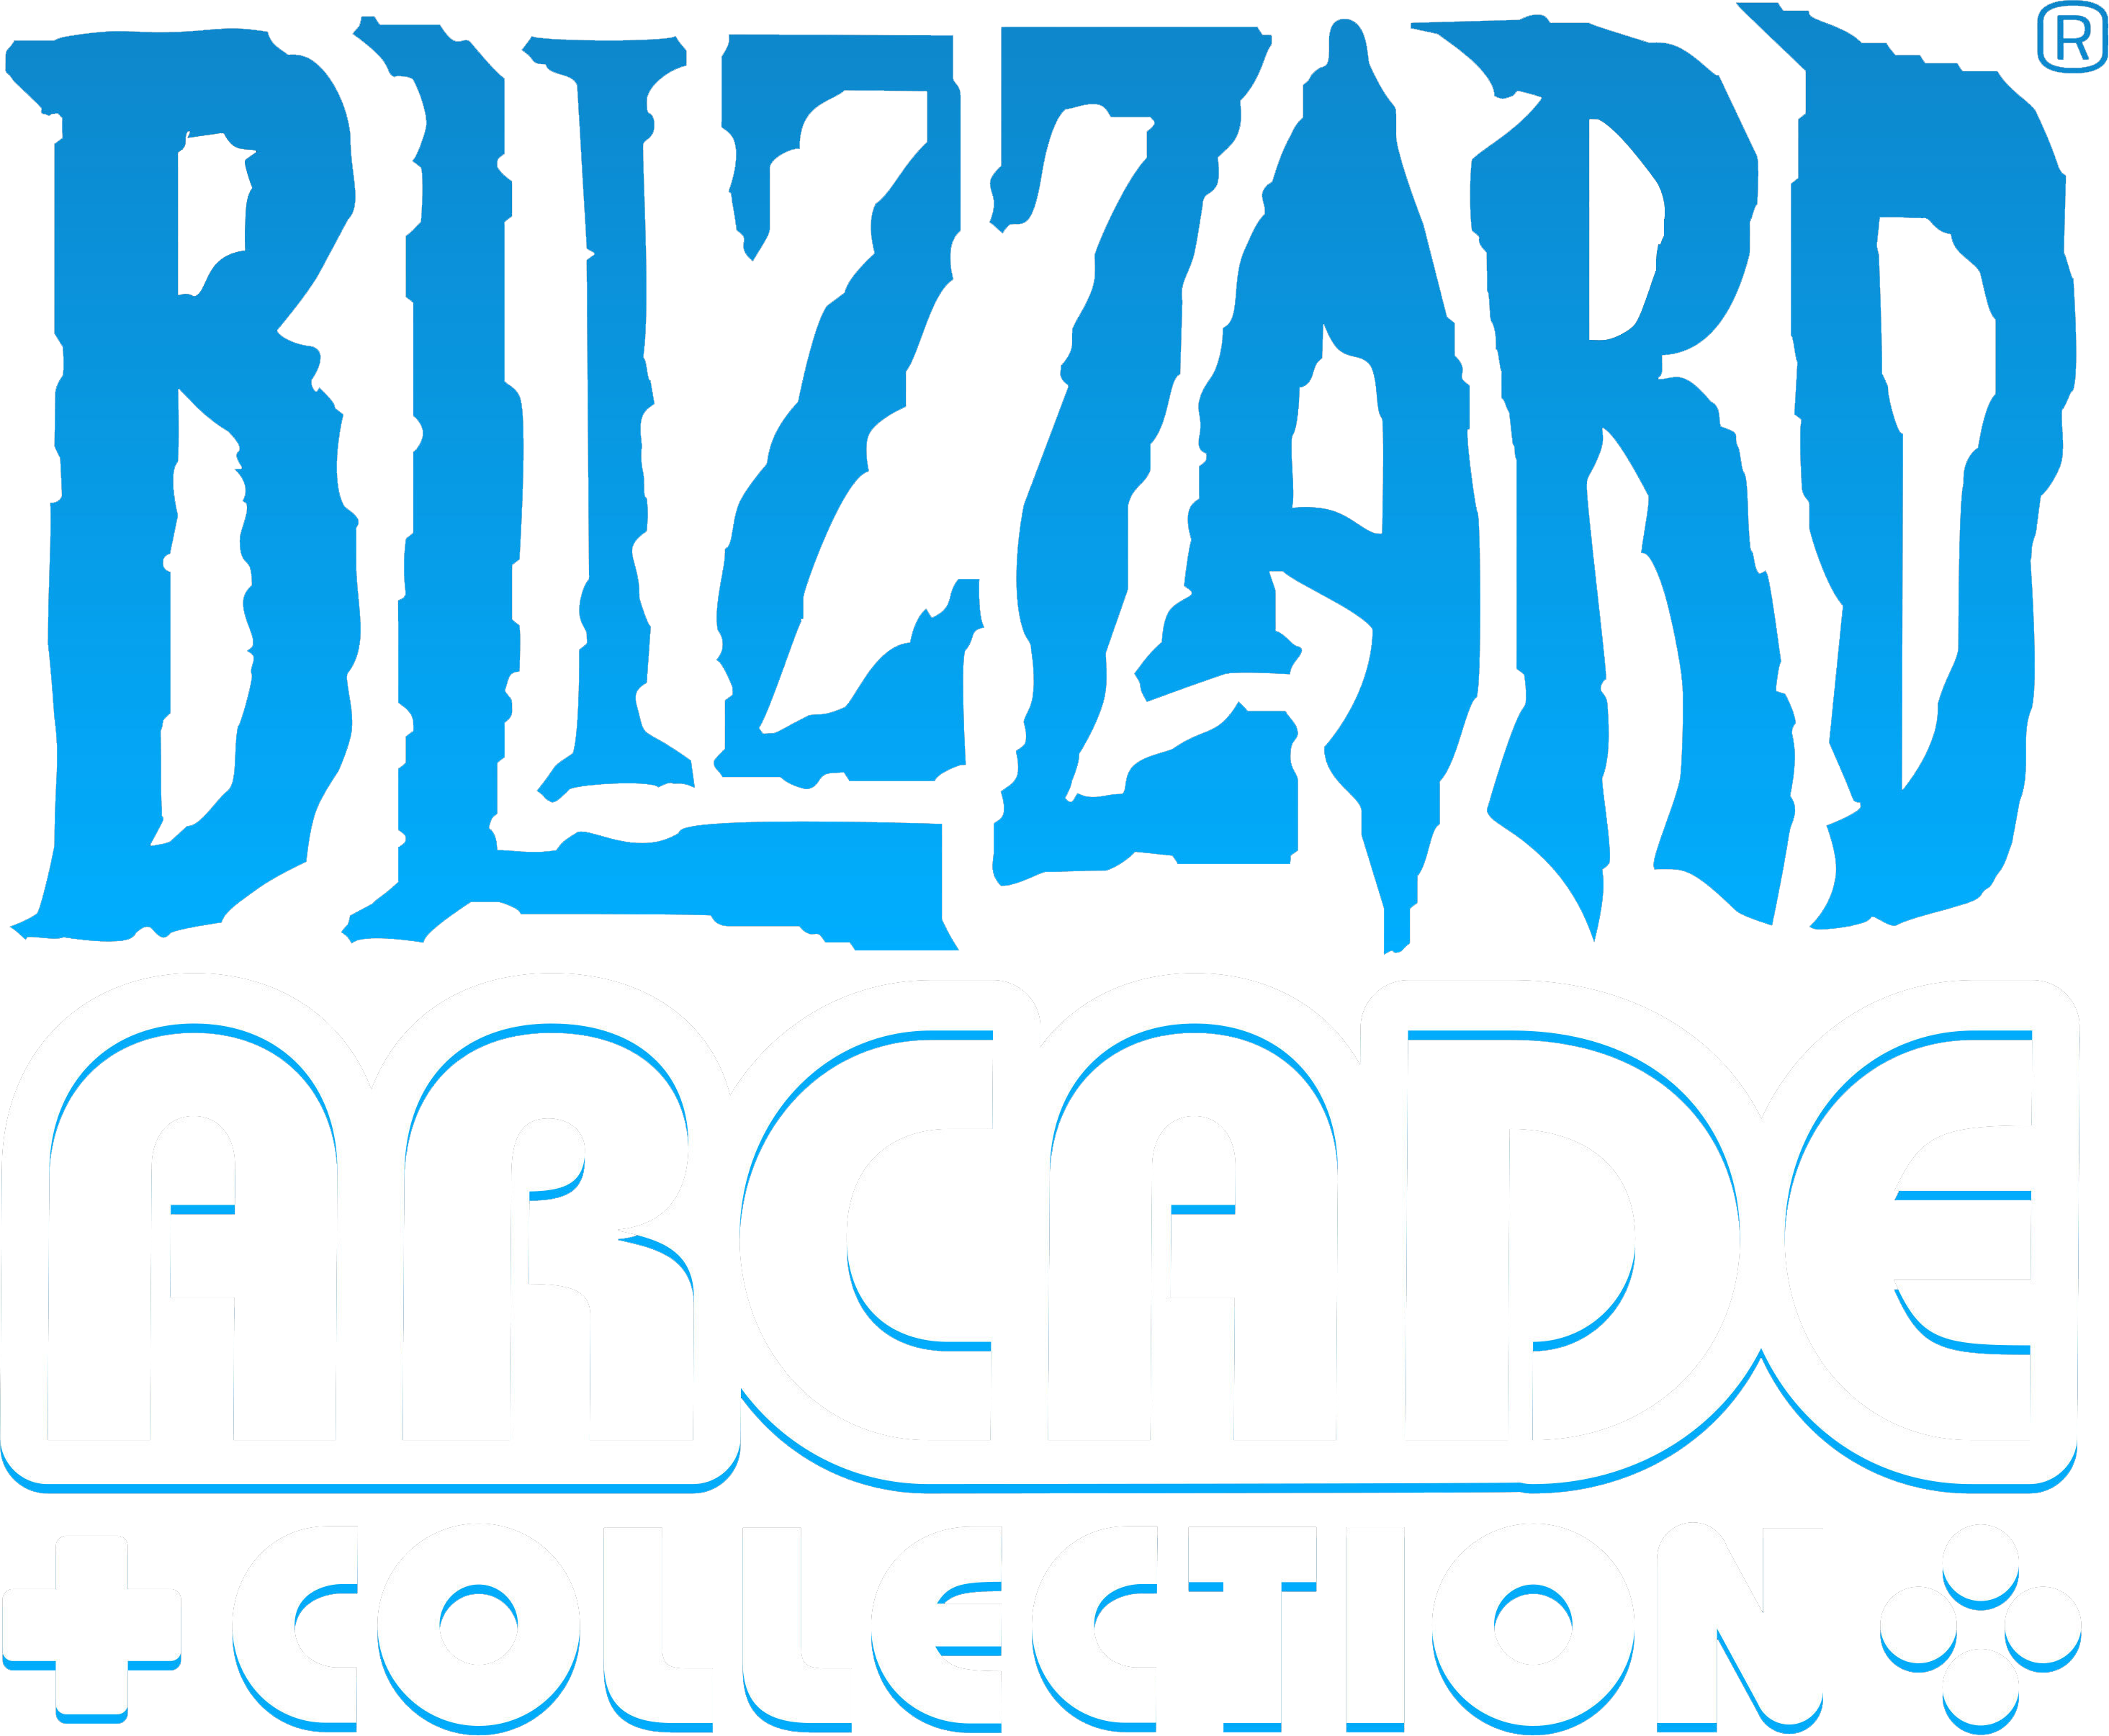 download the blizzard arcade collection